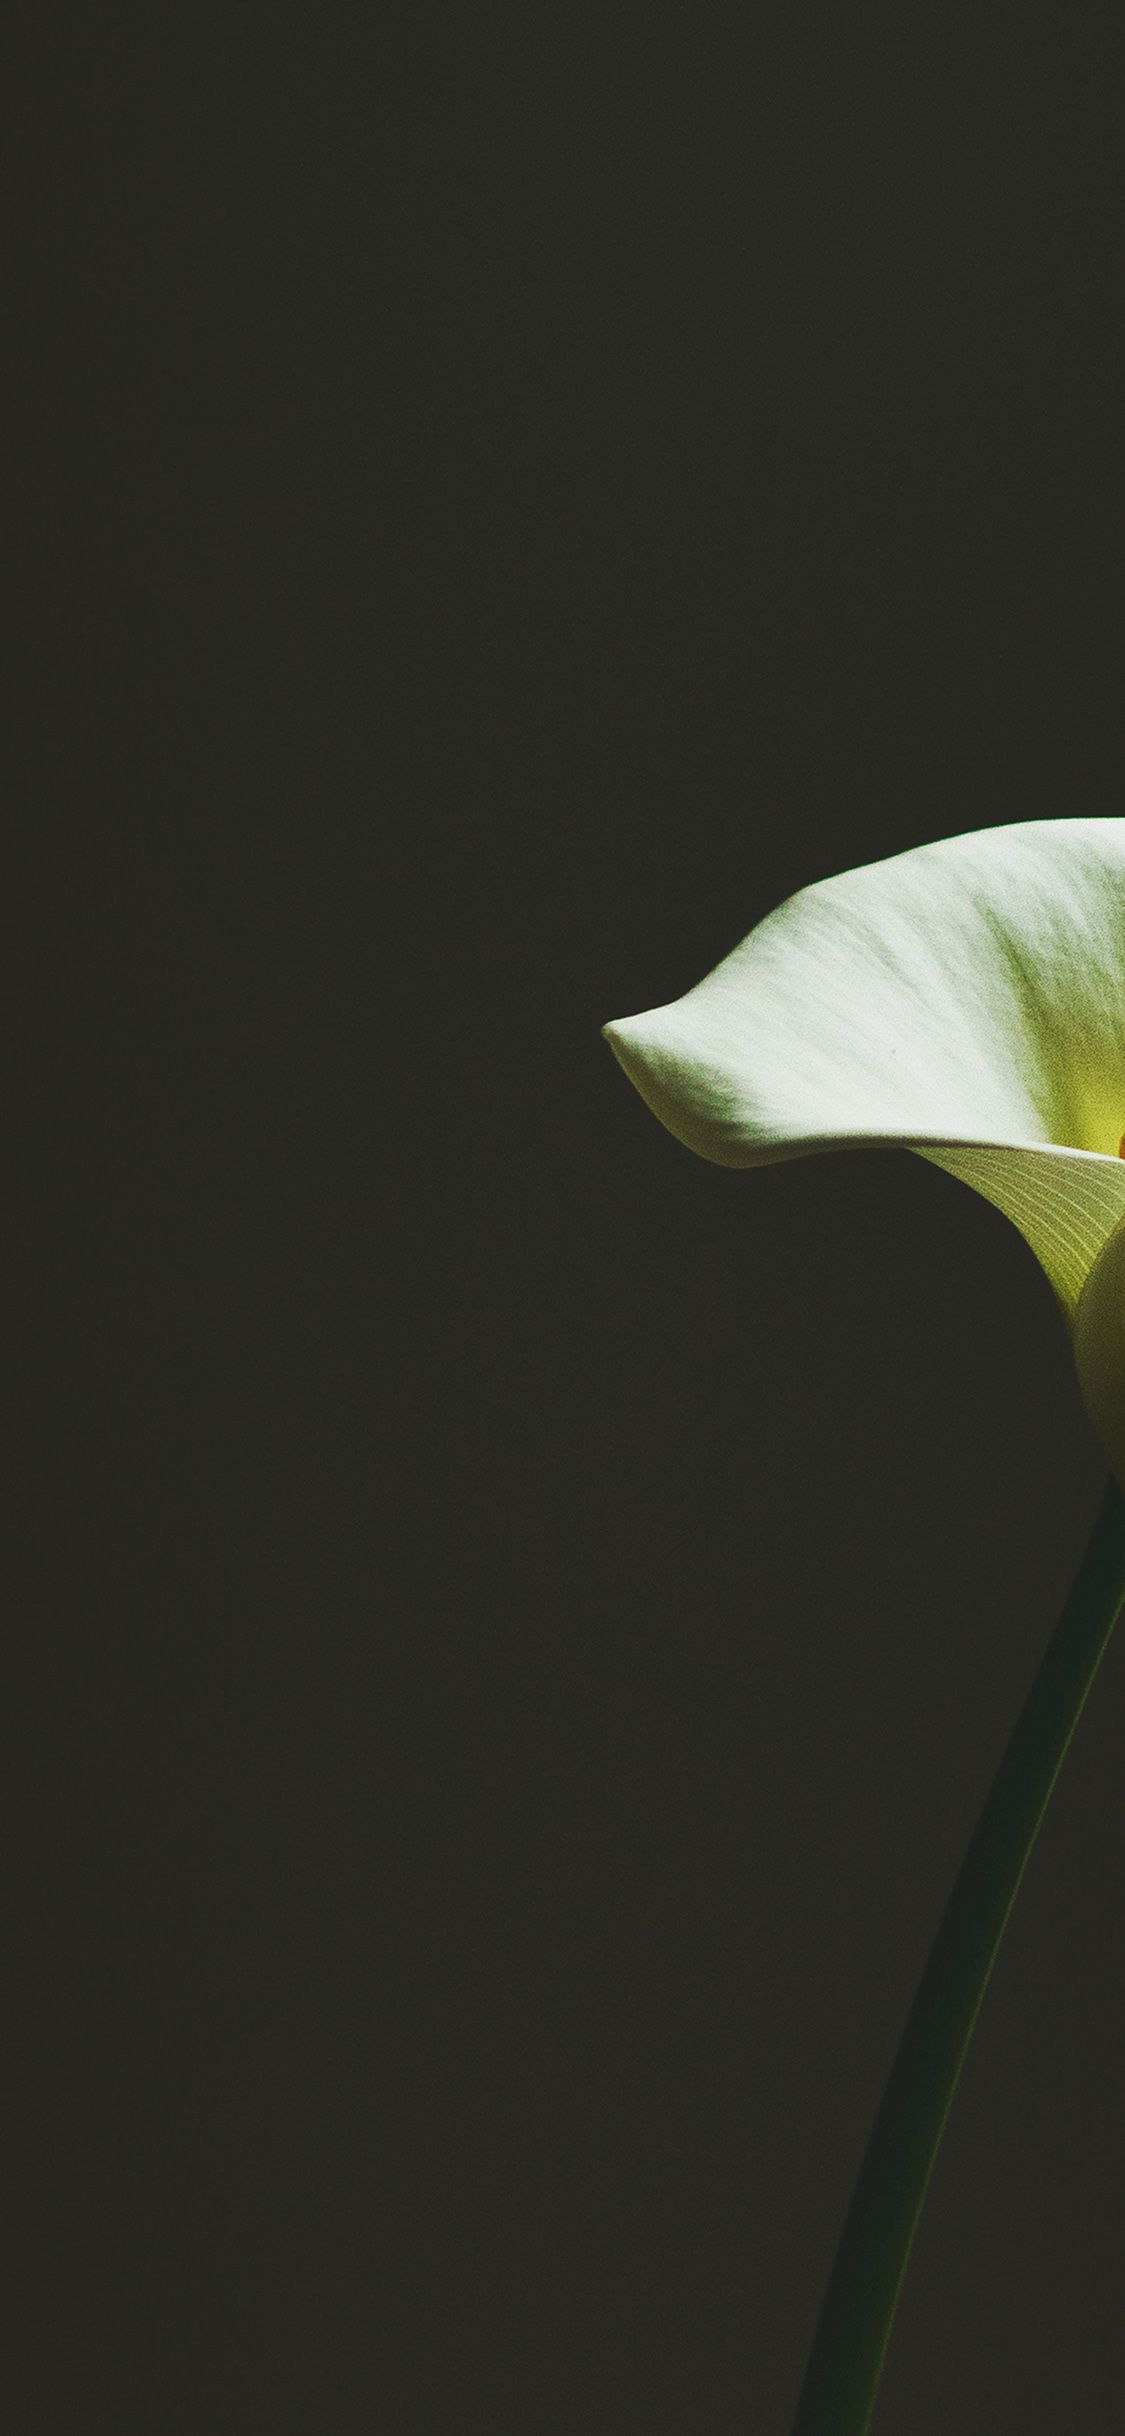 iPhone wallpaper. lily flower minimal simple green nature